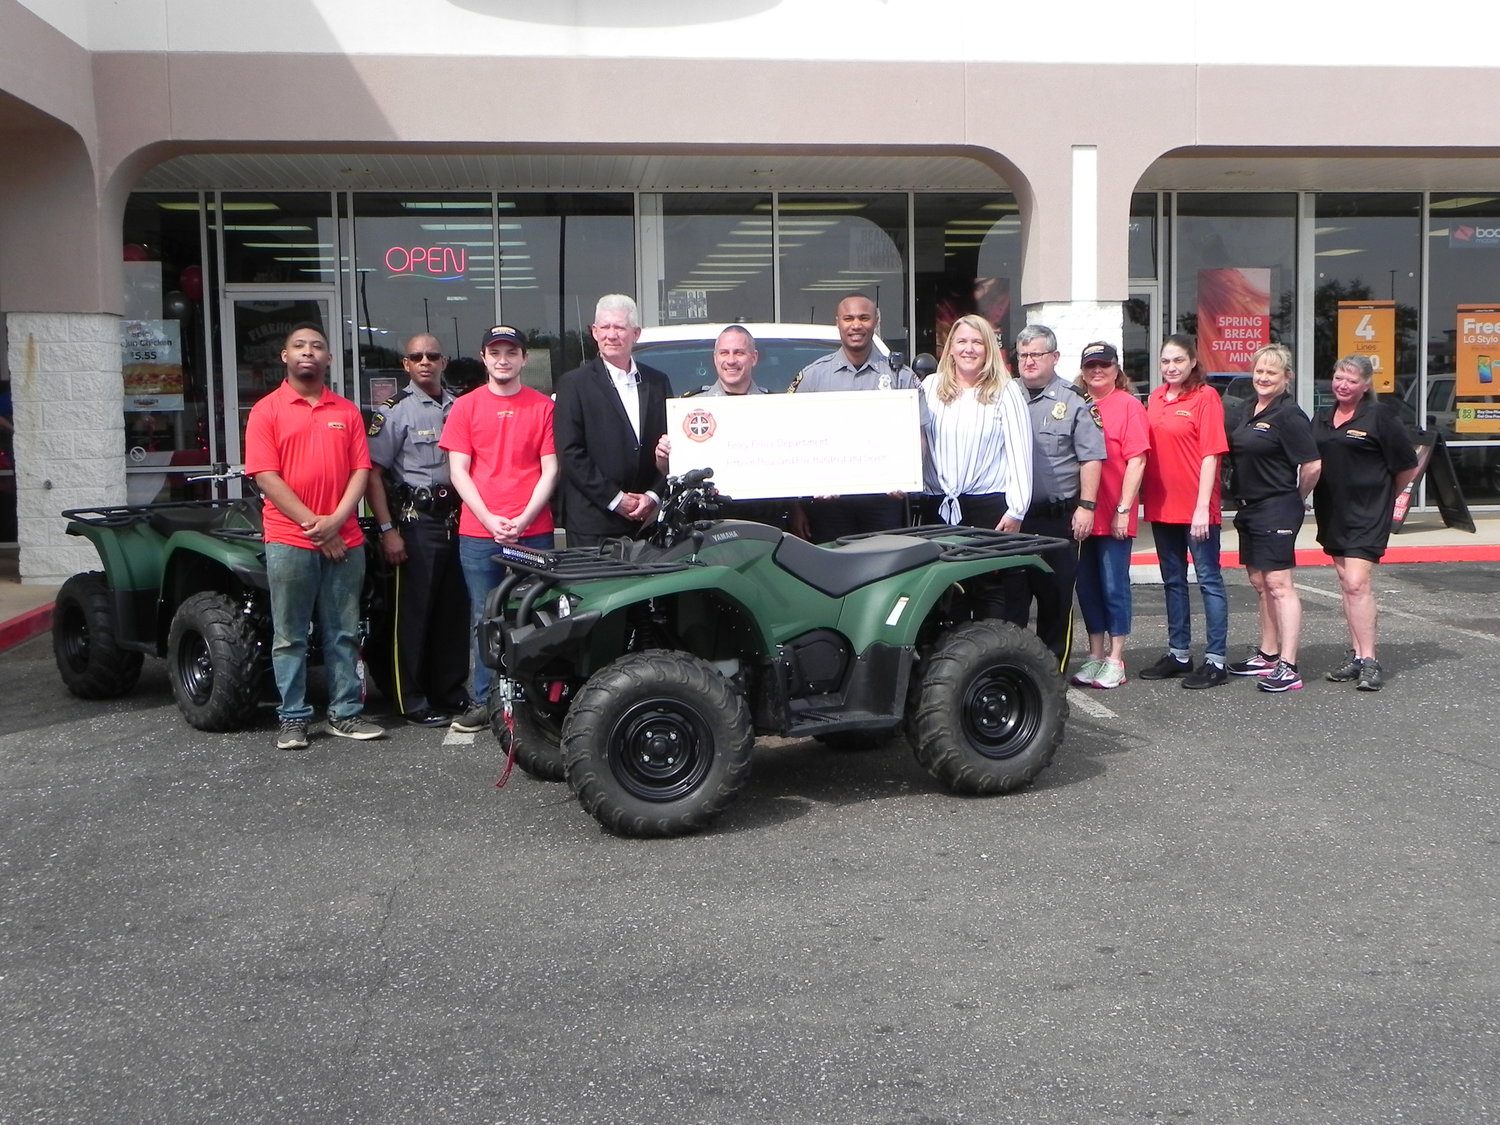 Foley PD officers, representatives from Firehouse Subs Public Safety Foundation, and Foley Firehouse Subs employees with the new ATVs donated to the Foley PD through a grant awarded by the foundation during a presentation at the Foley Firehouse Subs.